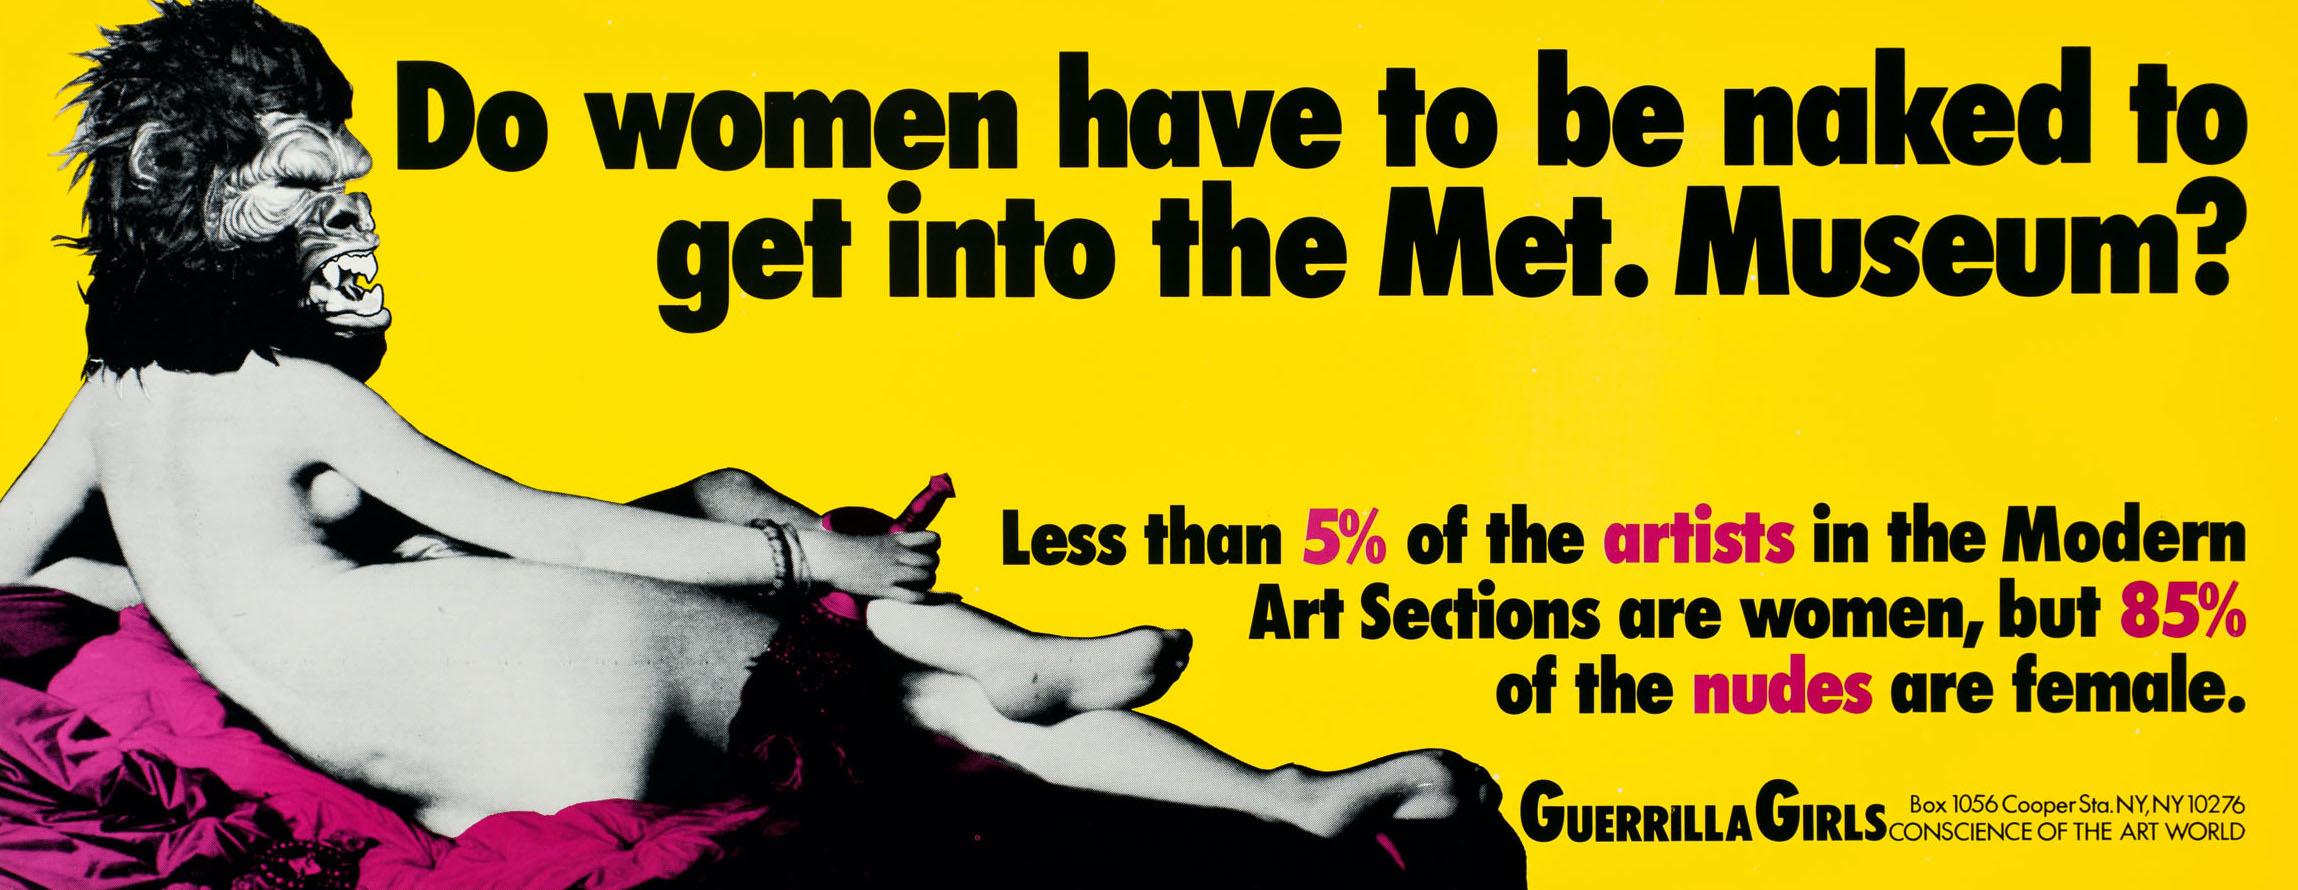 Guerrilla Girls:
Vintage original 1989 poster for: Guerilla Girls: Do Women Have To Be Naked To Get Into the Met. Museum? 

Pictured here is the much iconic reclining naked woman who wears a gorilla mask. The image is based on the 1814 painting by